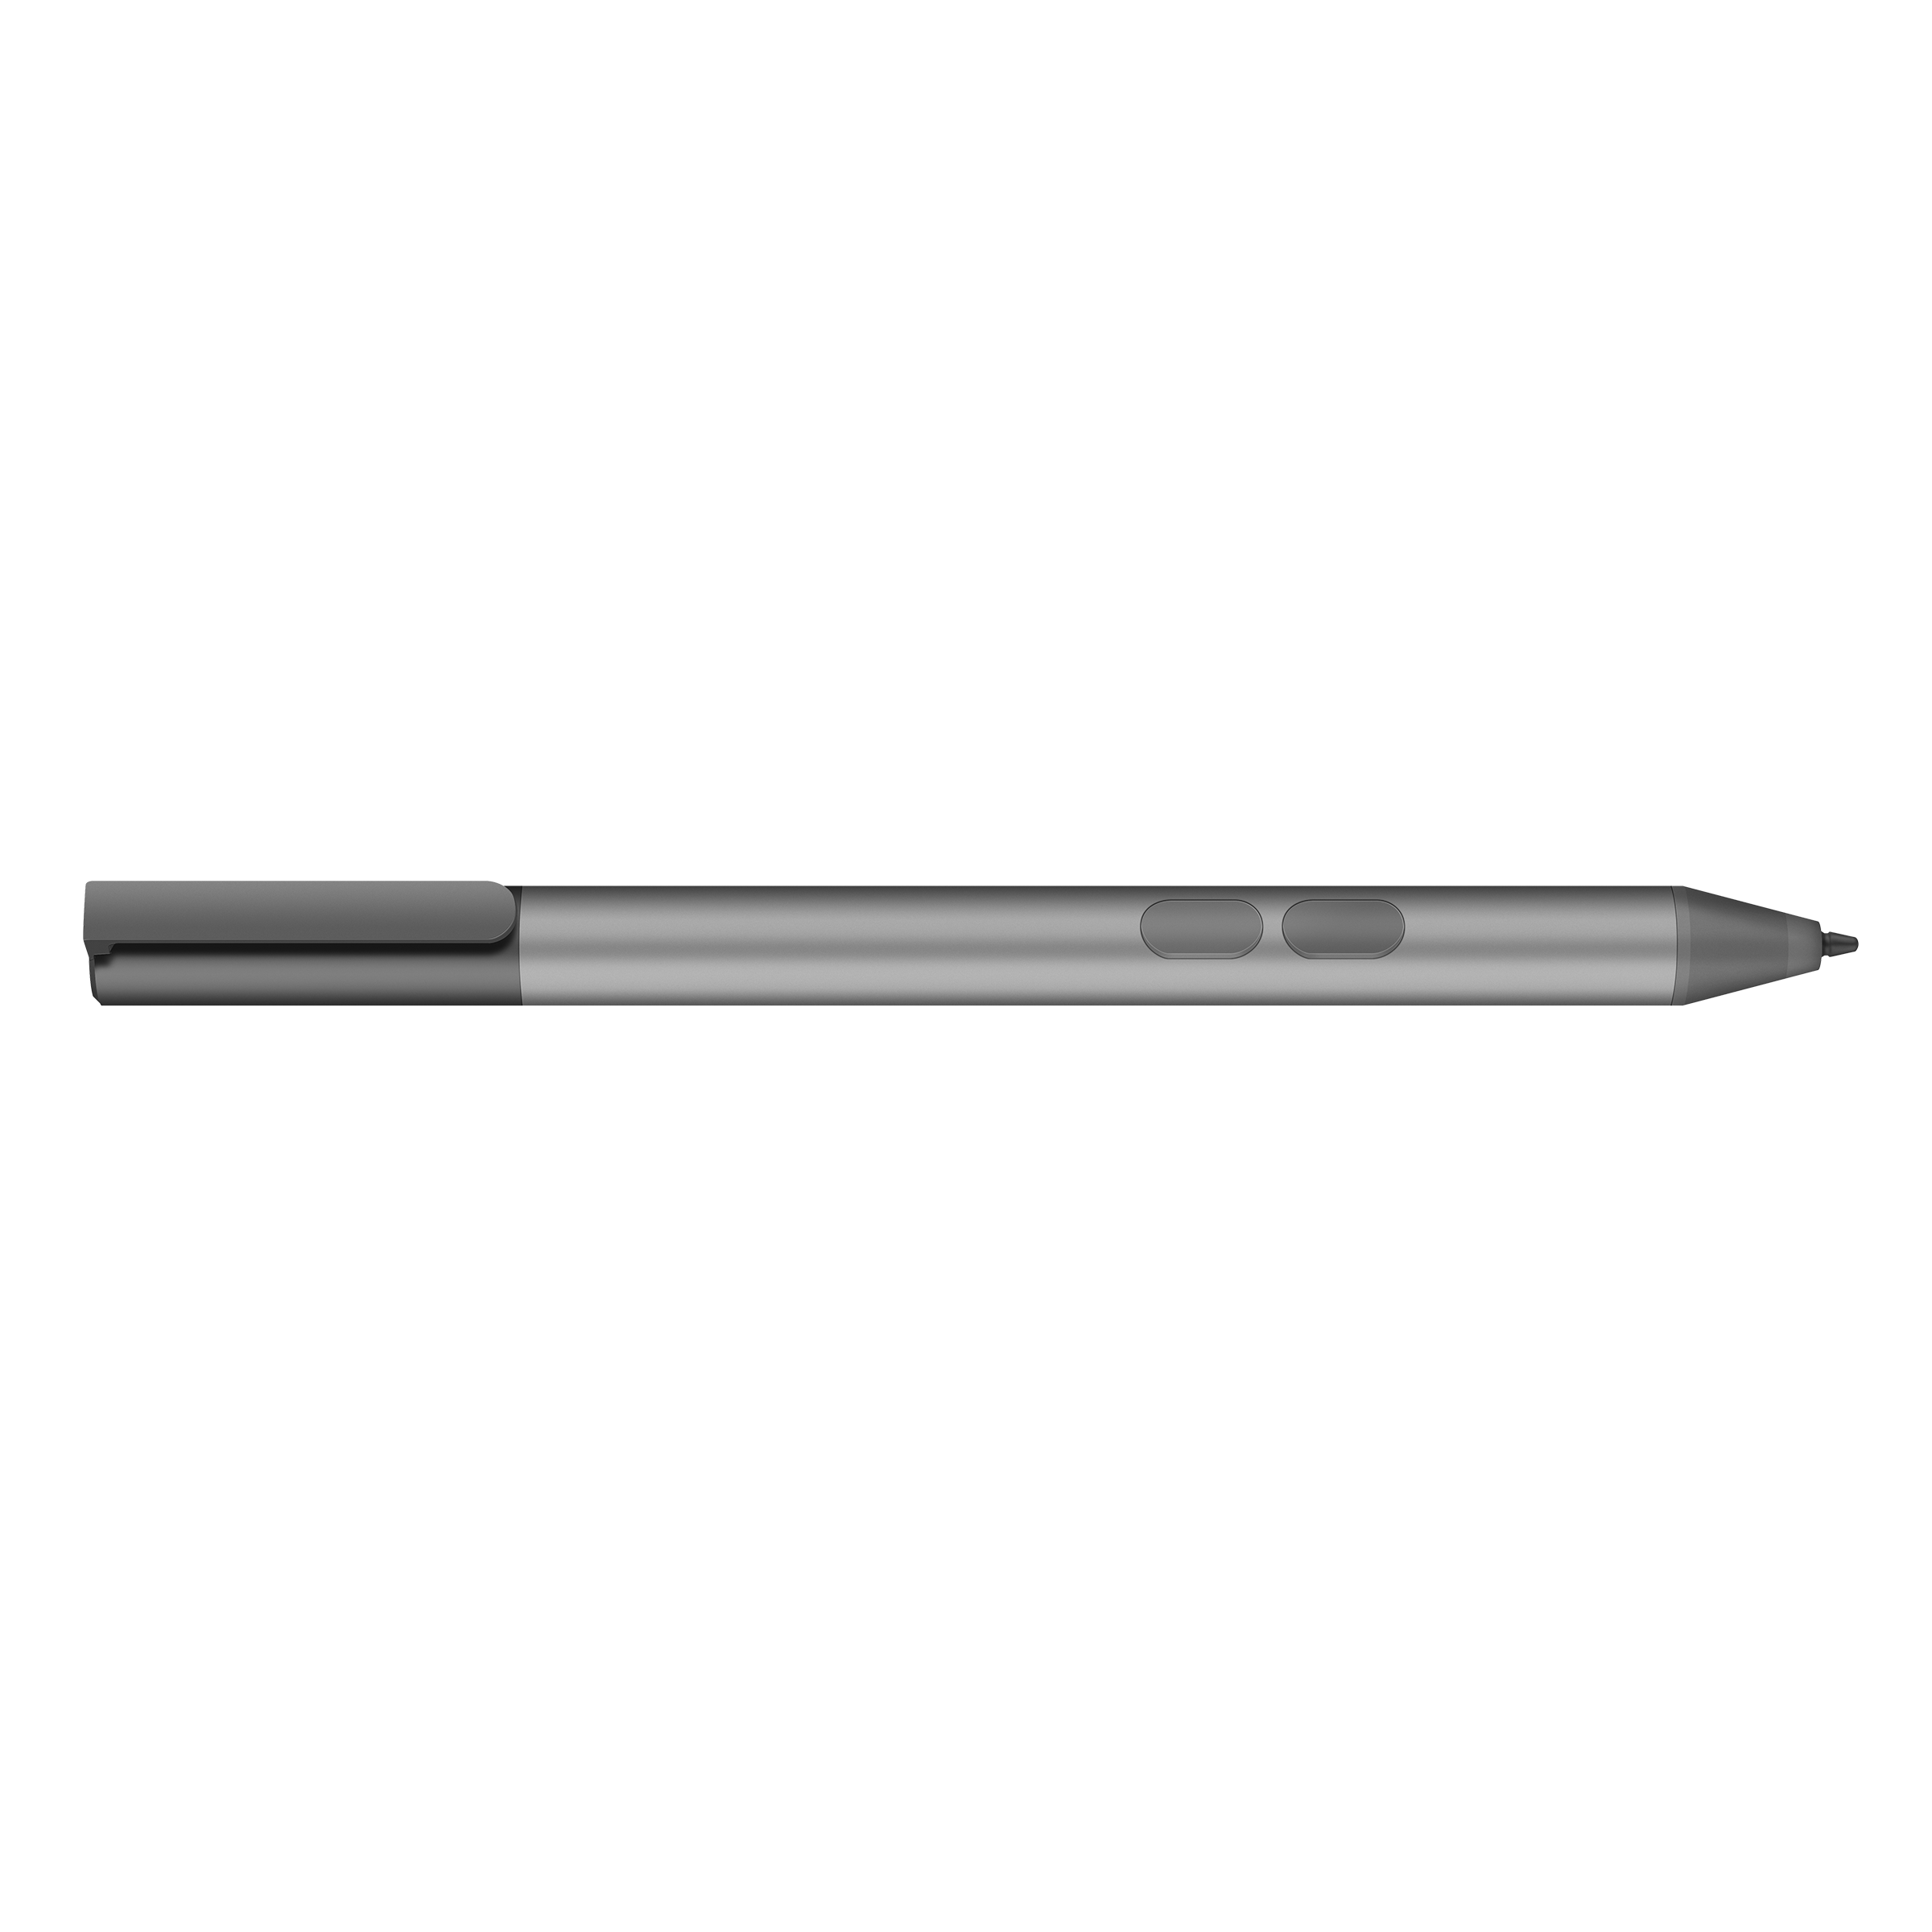 Metallic Silver BoxWave Stylus Pen for ASUS ZenBook Pro 15 UX550GE FineTouch Capacitive Stylus Super Precise Stylus Pen for ASUS ZenBook Pro 15 UX550GE 